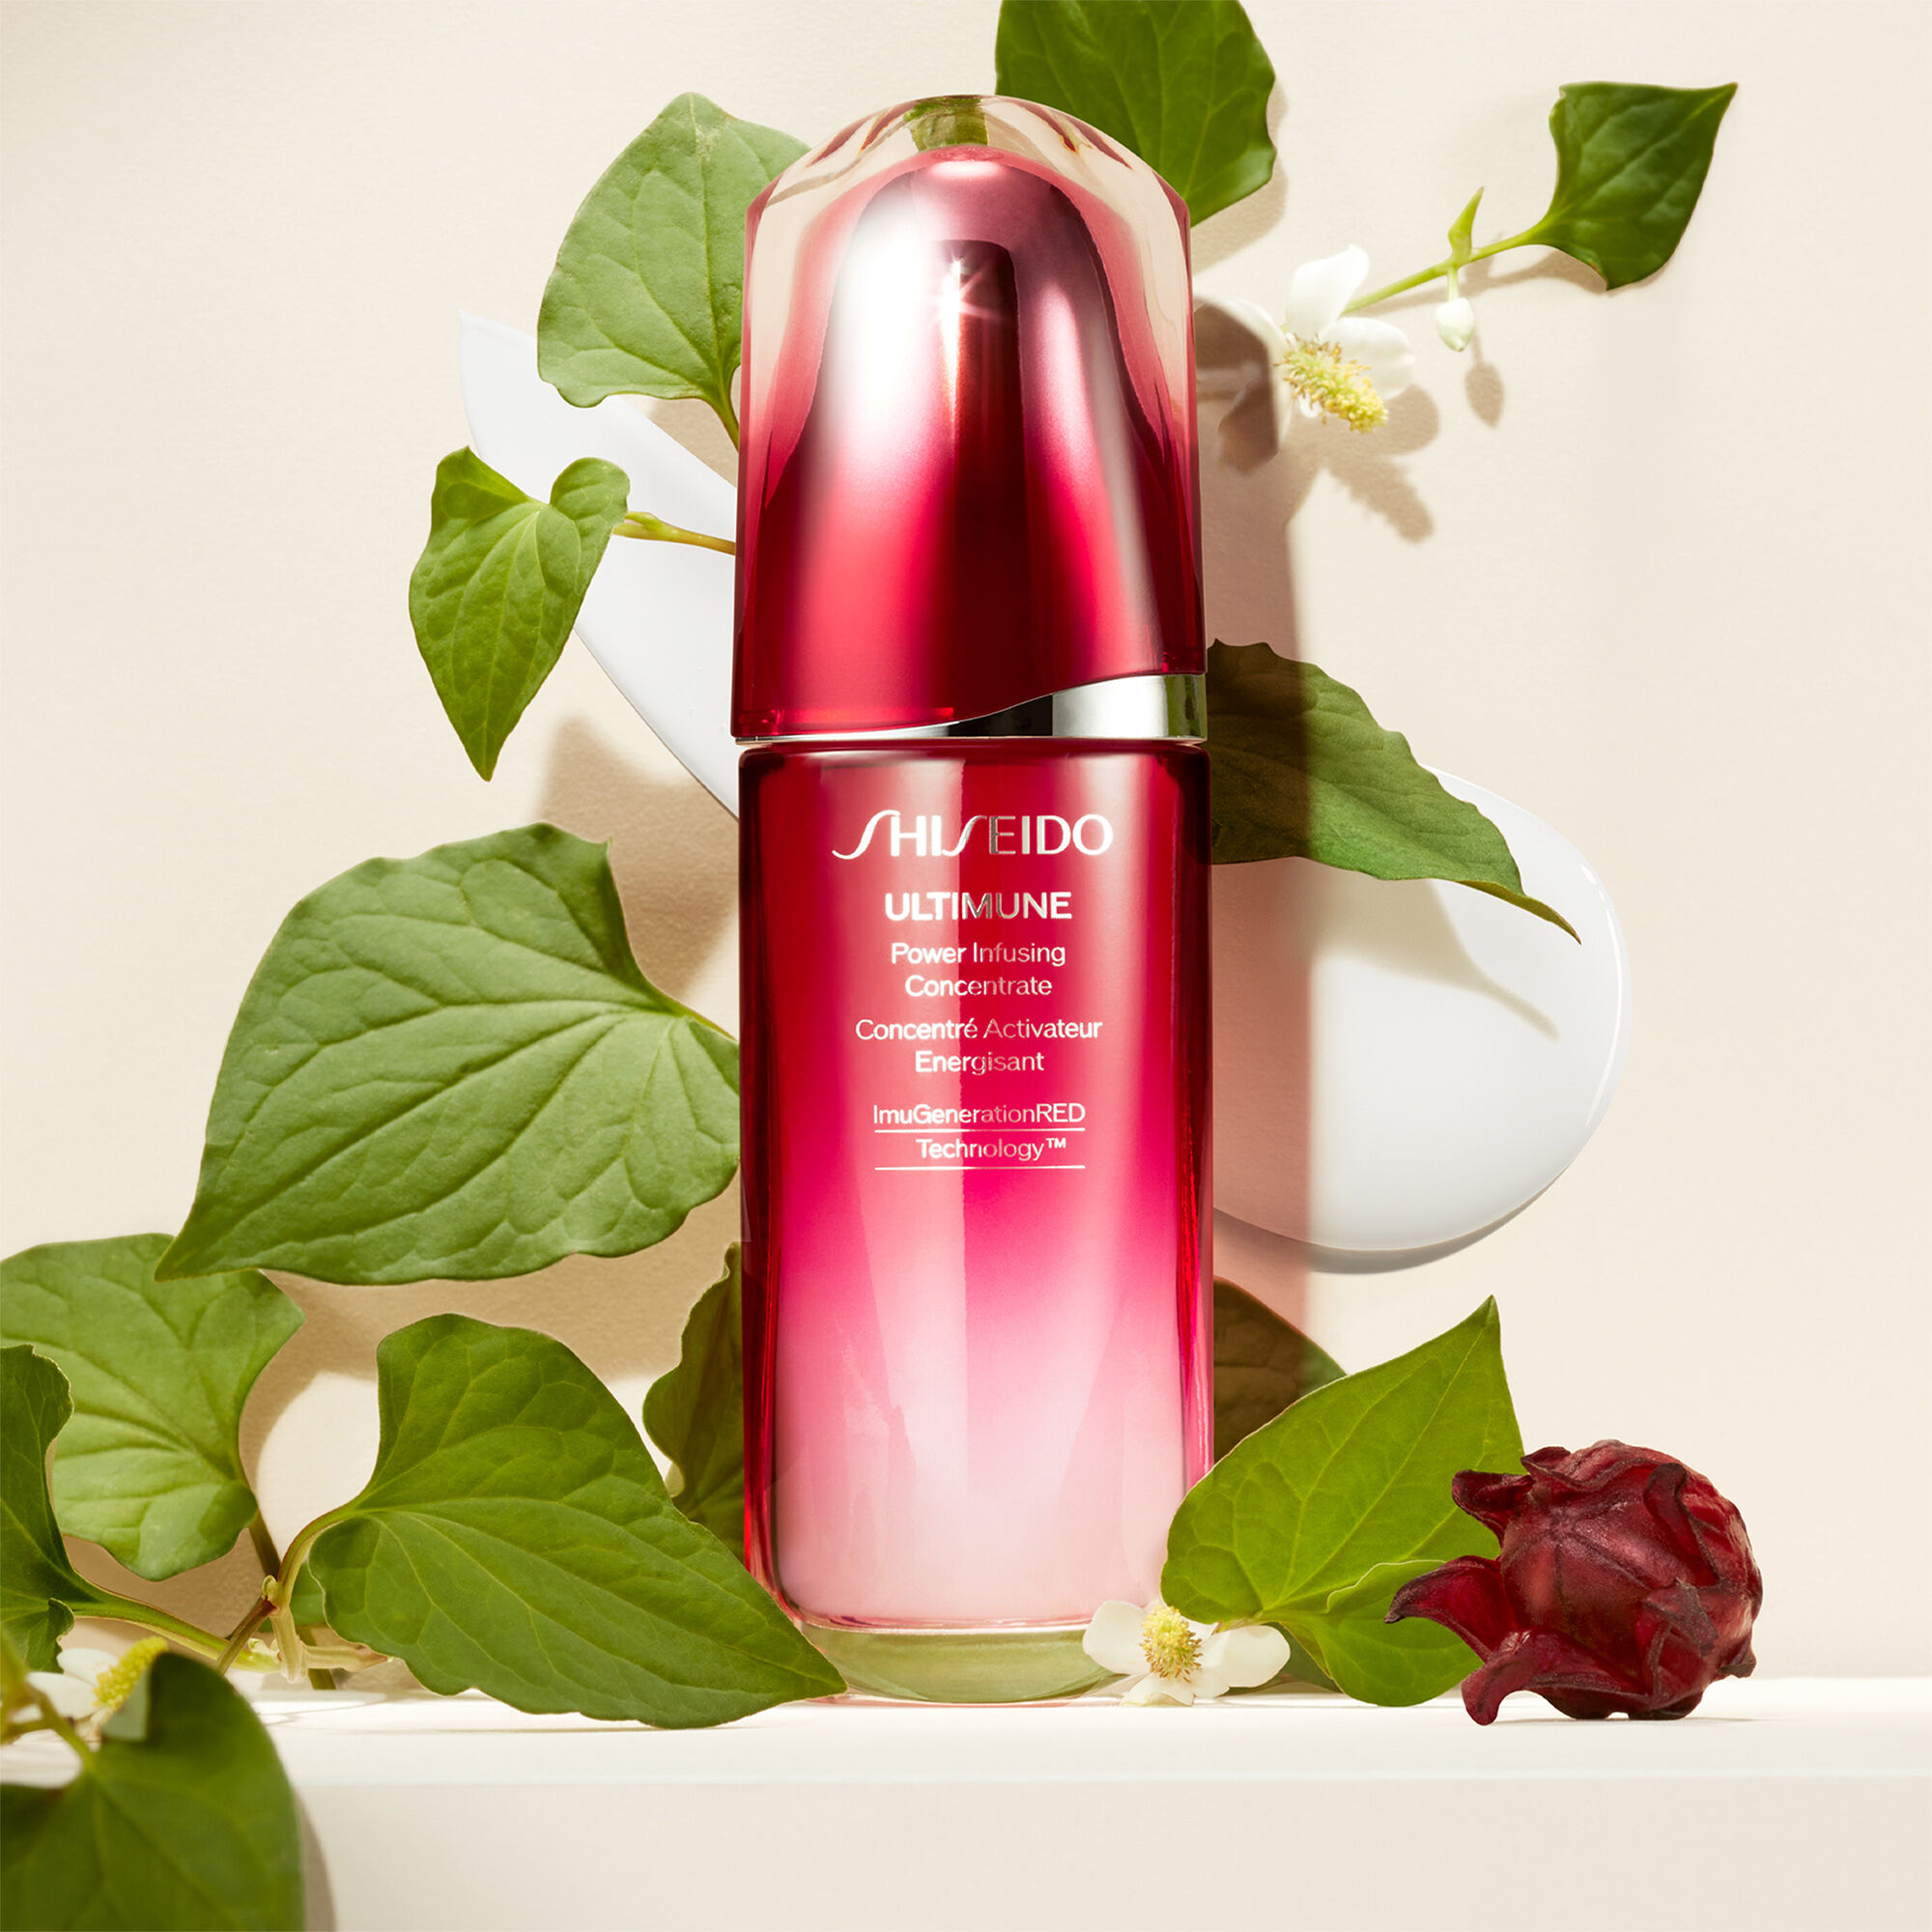 Ultimune Power Infusing Concentrate Face Serum | SHISEIDO